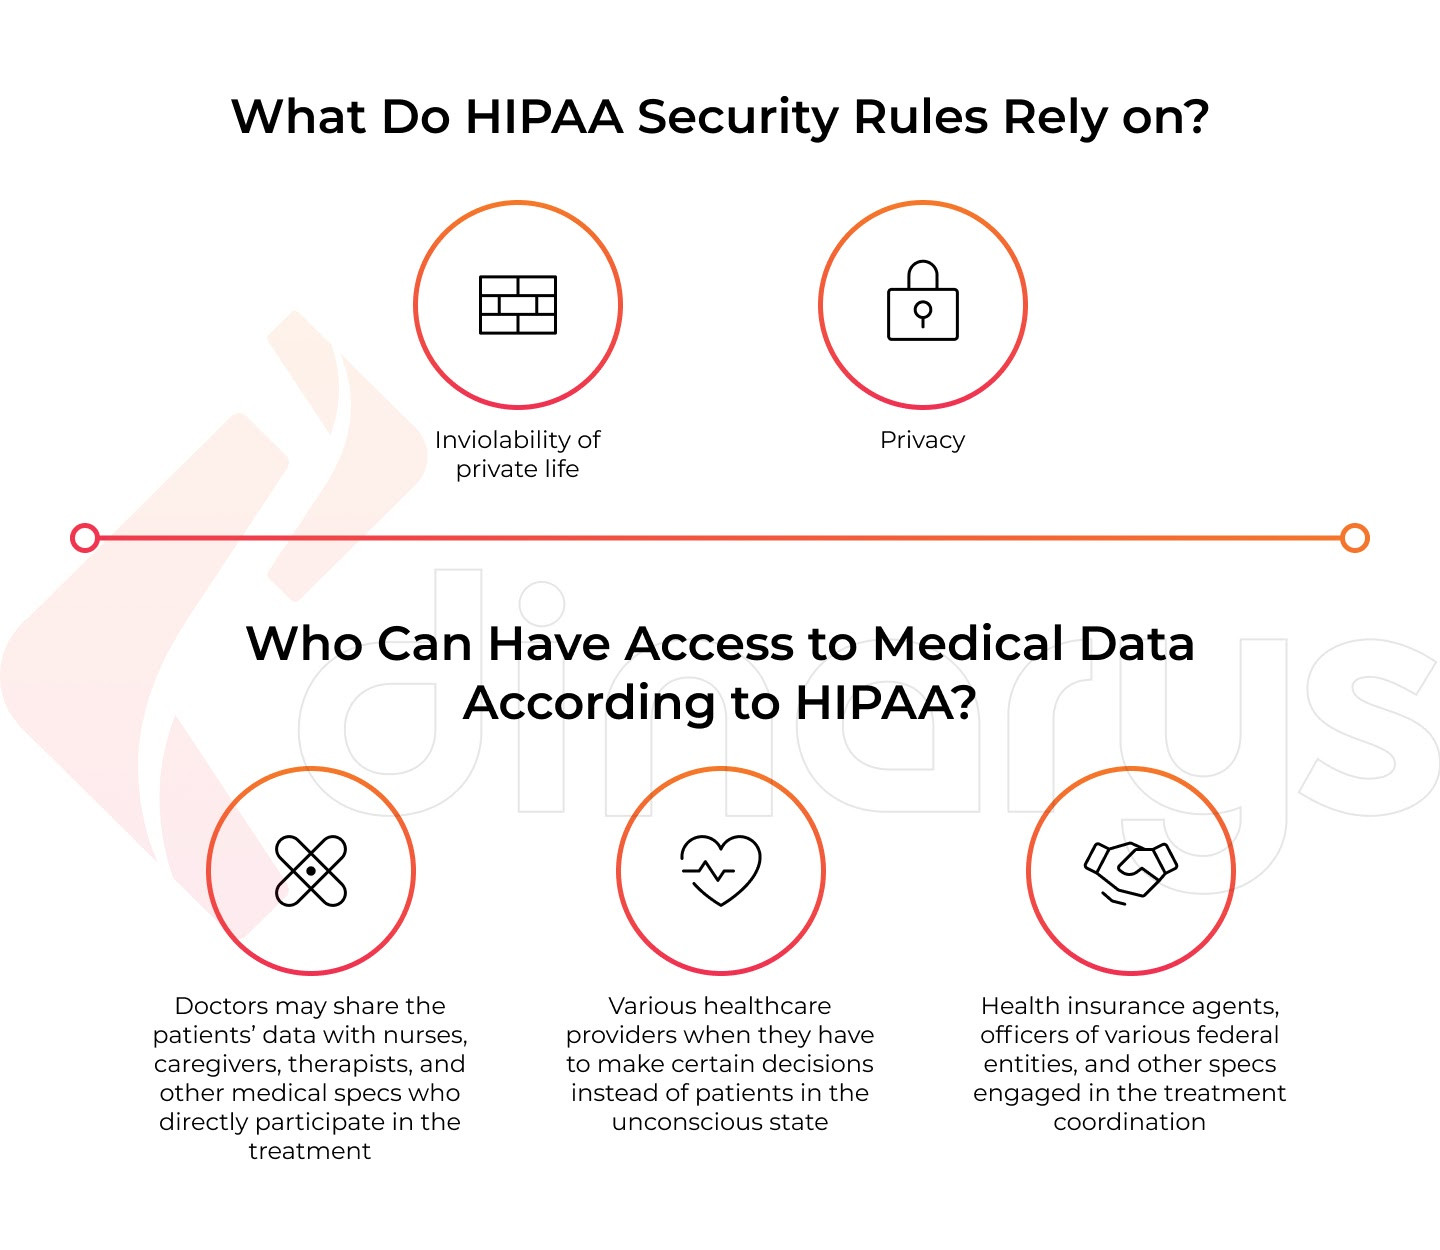 What Do HIPAA Security Rules Rely On